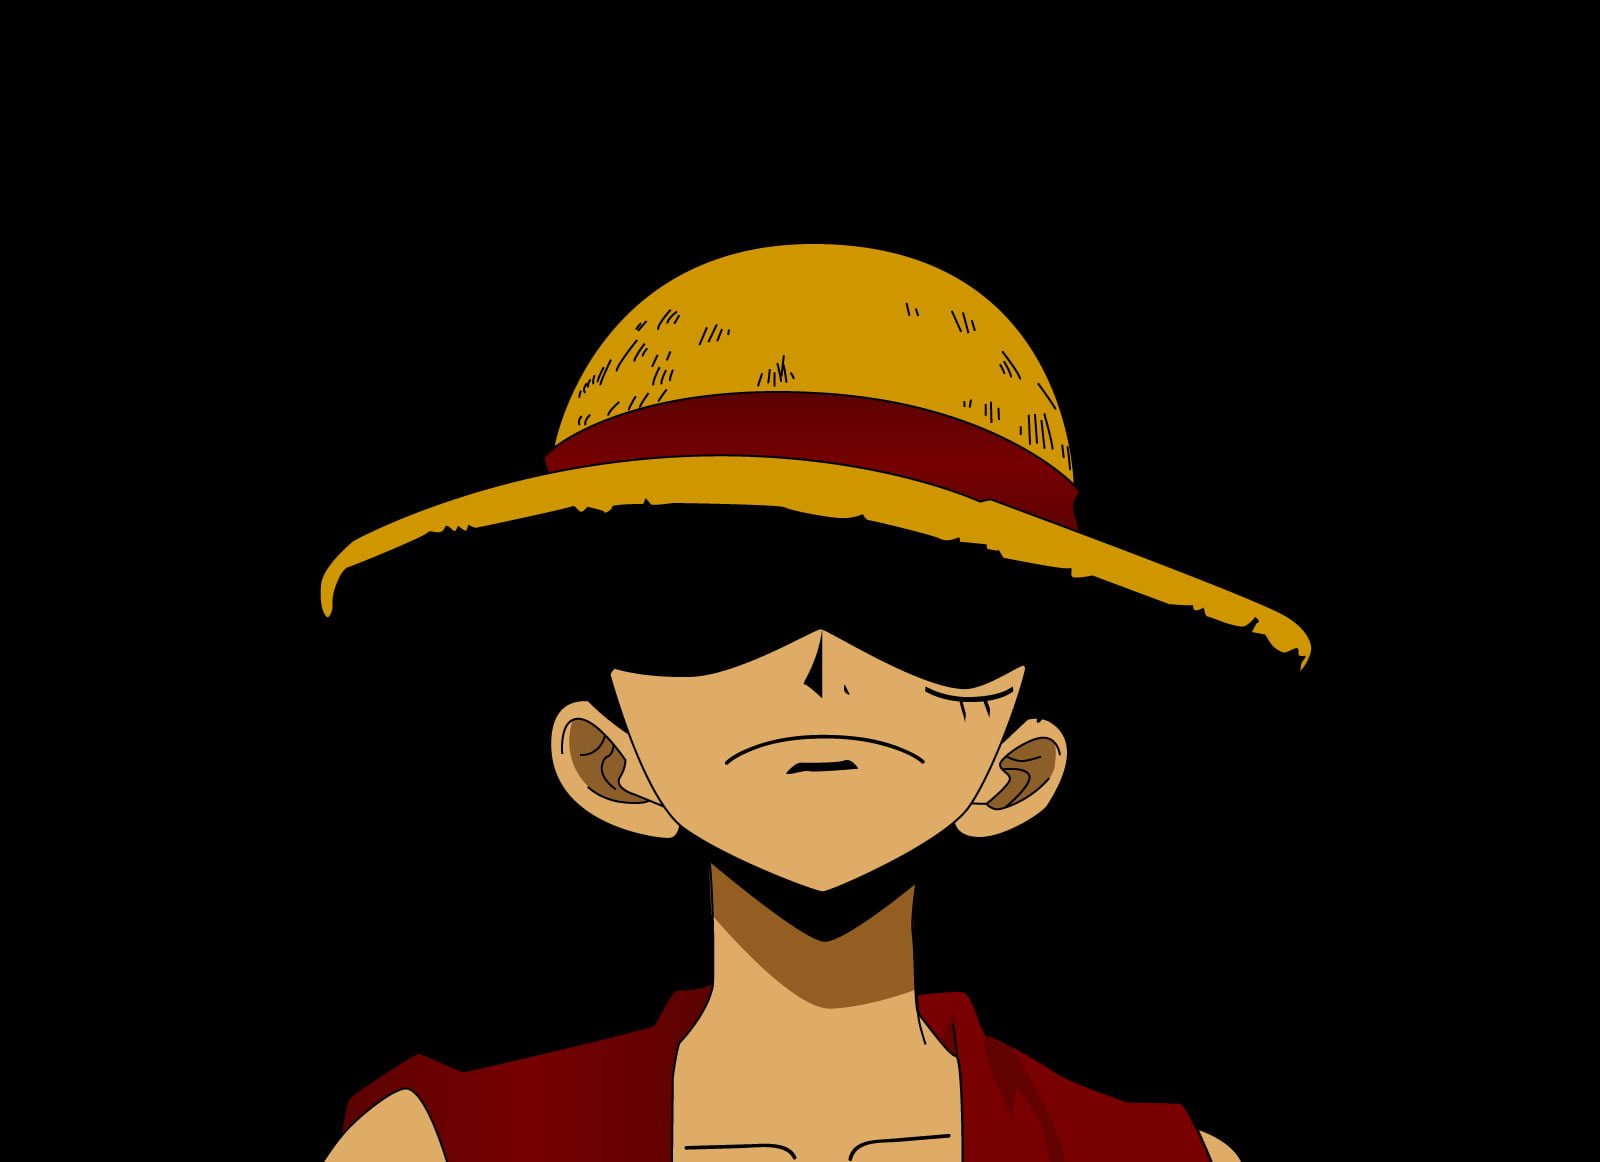 Monkey D. Luffy wallpaper, One Piece, anime, one person, studio shot, indoors